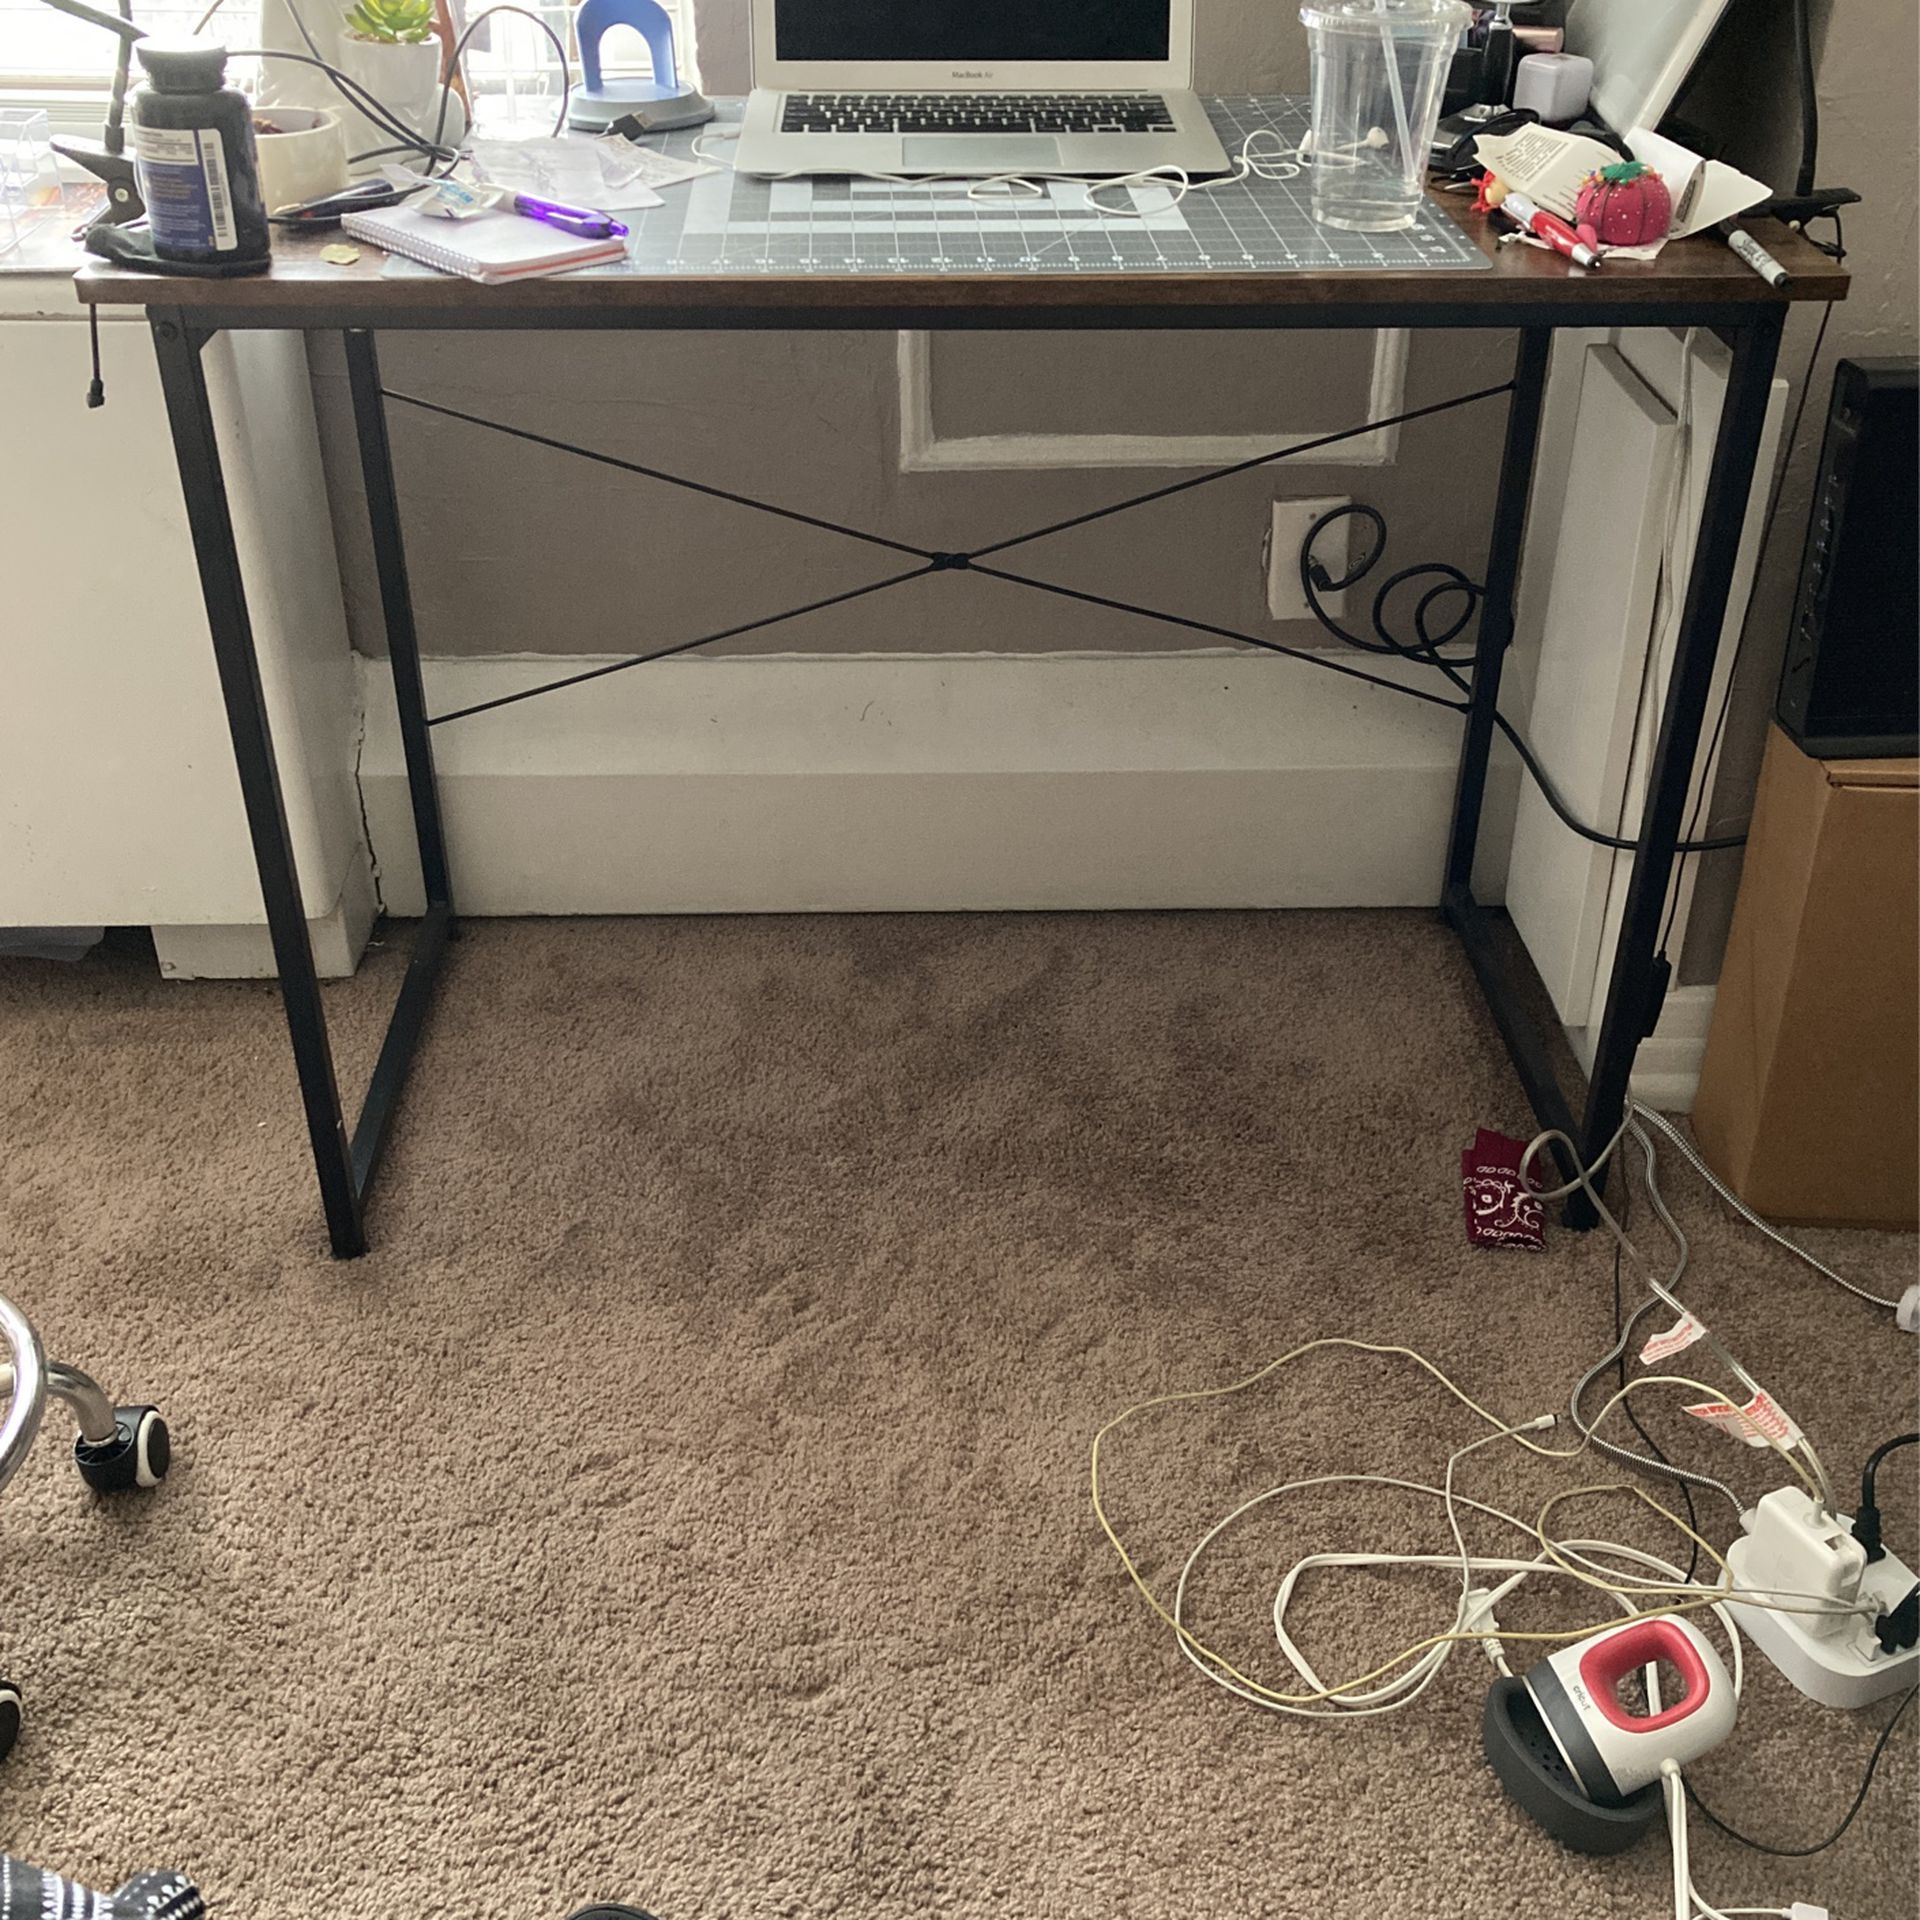 Desk with Attachable Storage And Hook To Hang